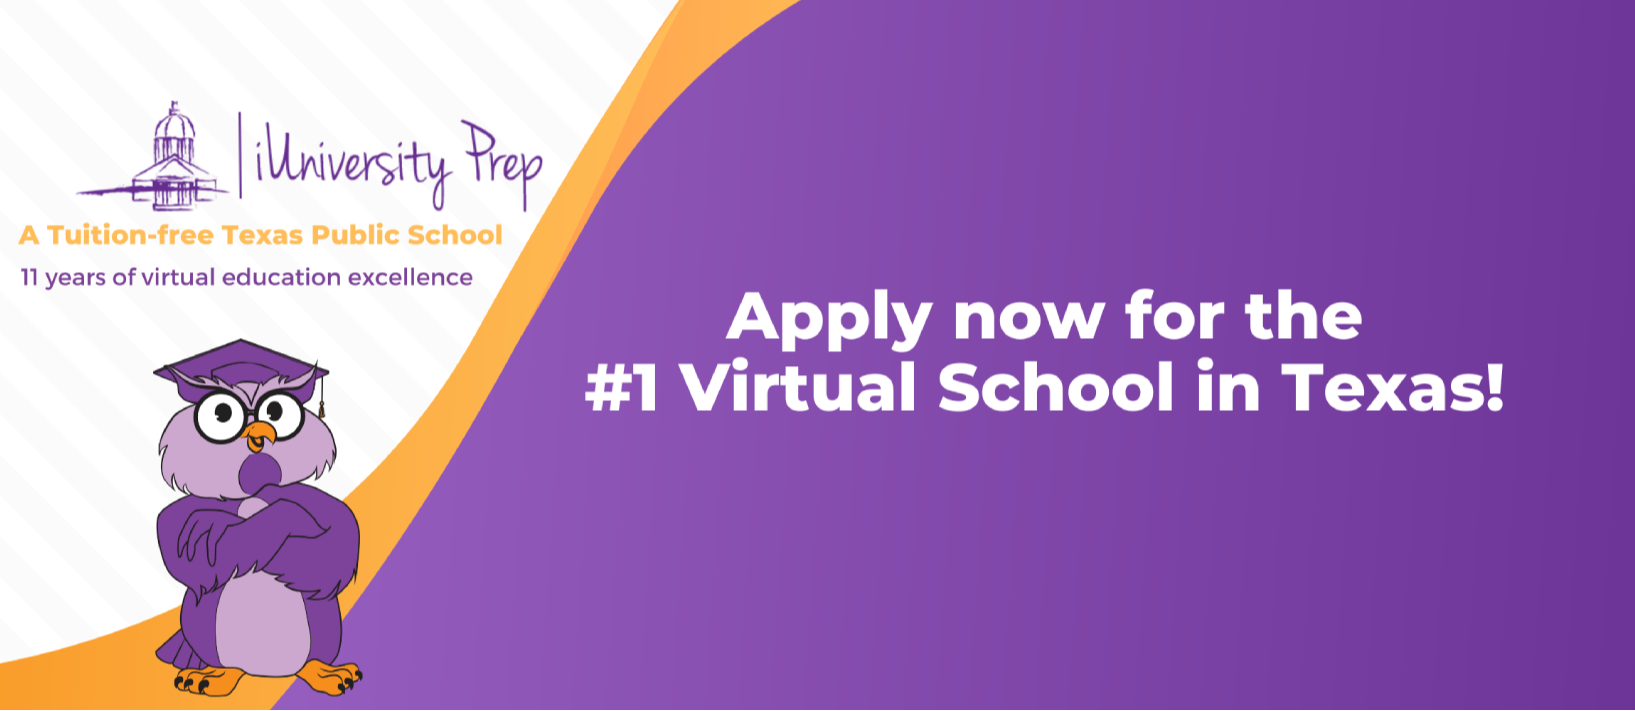 Apply now for the #1 virtual school in Texas!